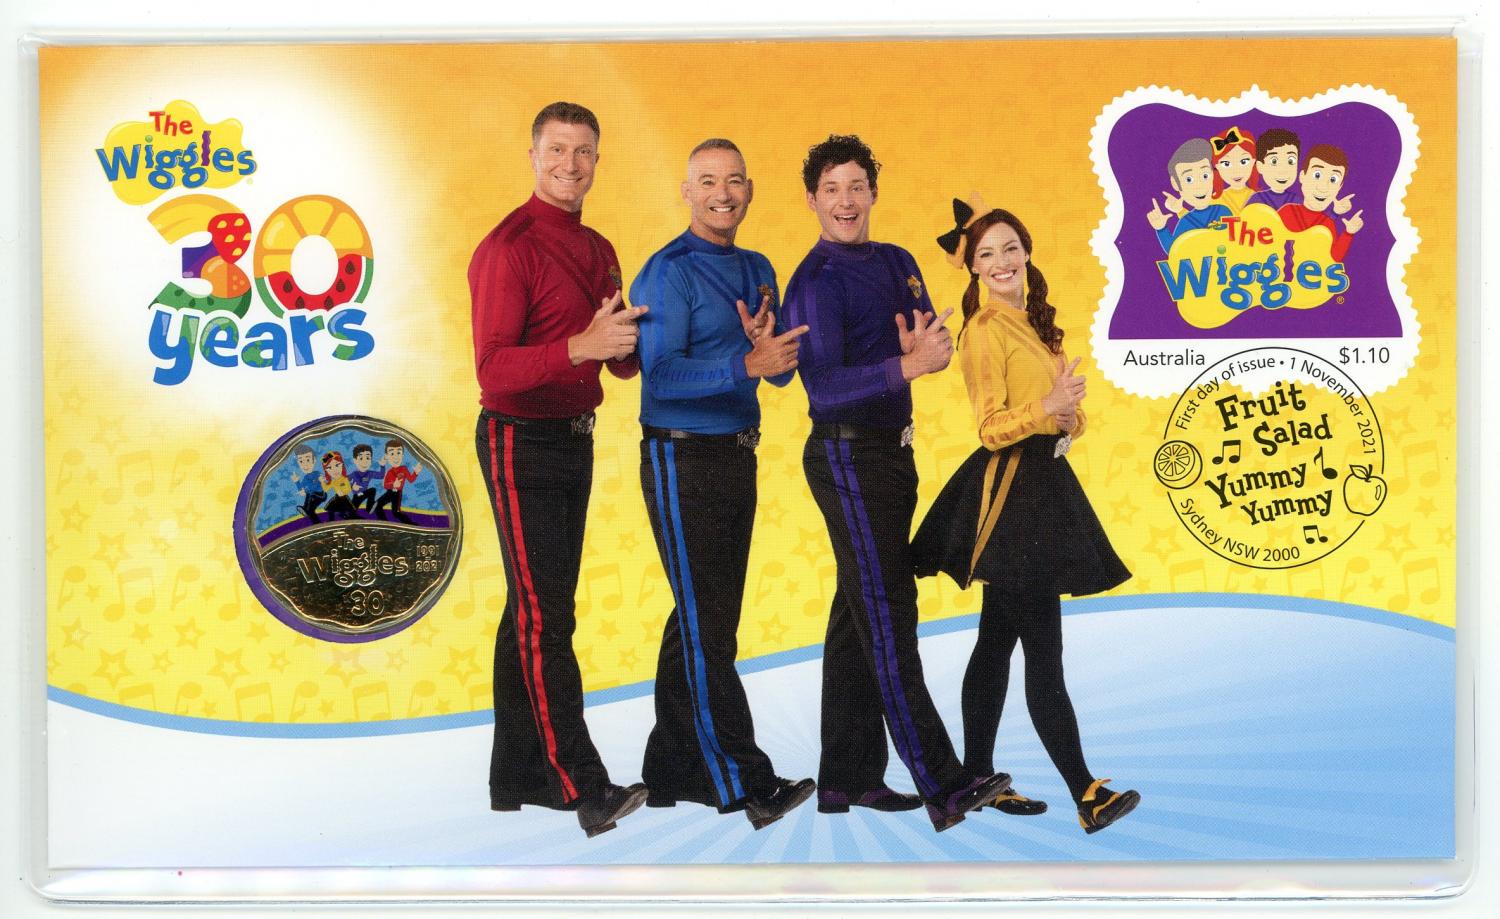 Thumbnail for 2021 Issue 37 The Wiggles 30 Years